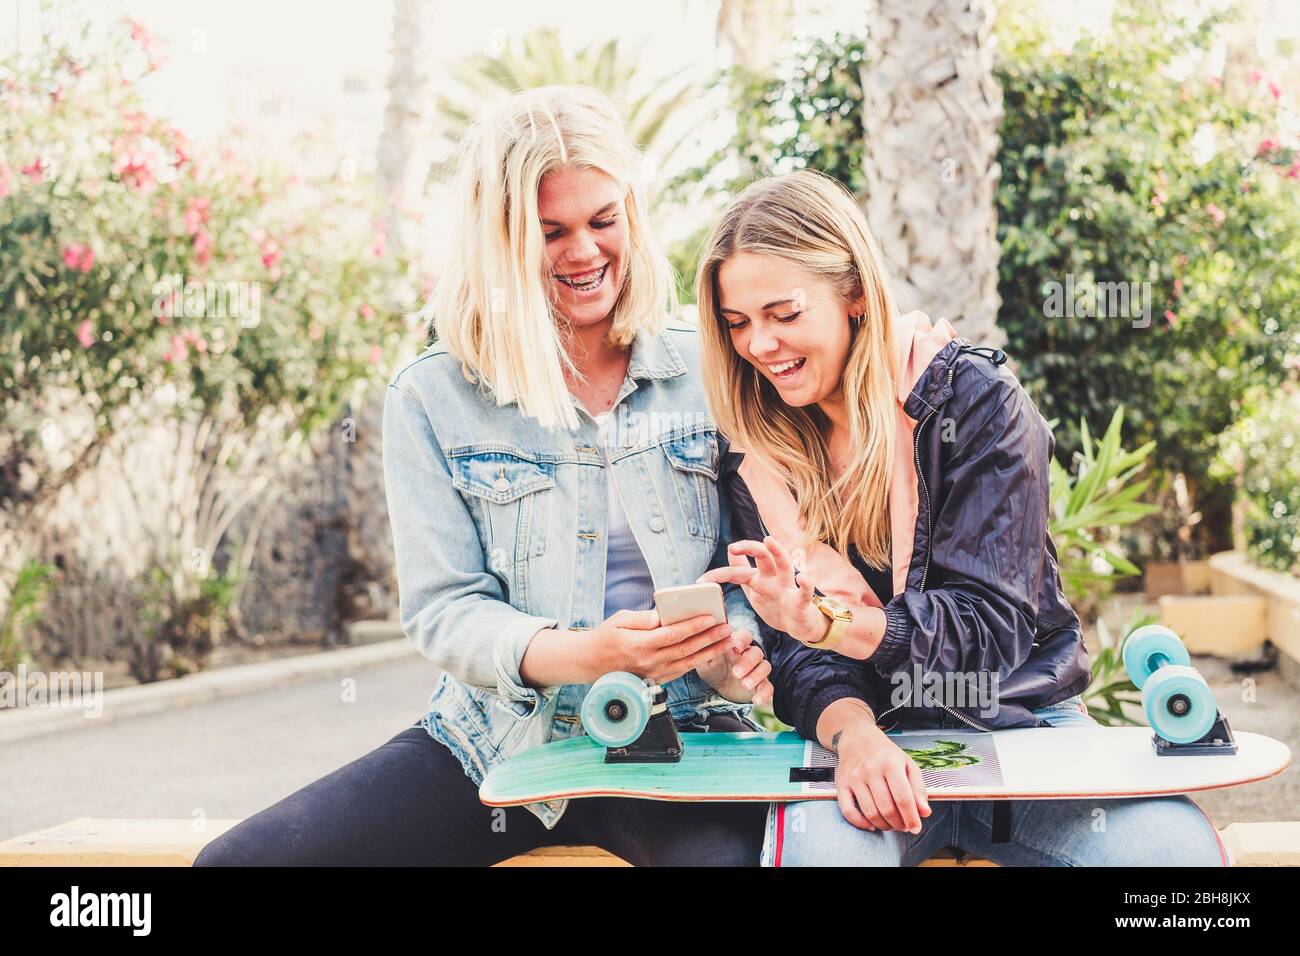 Couple of friends having fun using technology and smartphone witting in a park - hipster skateboard and millennial people in friendshp together - laugh and smile blondes girls Stock Photo